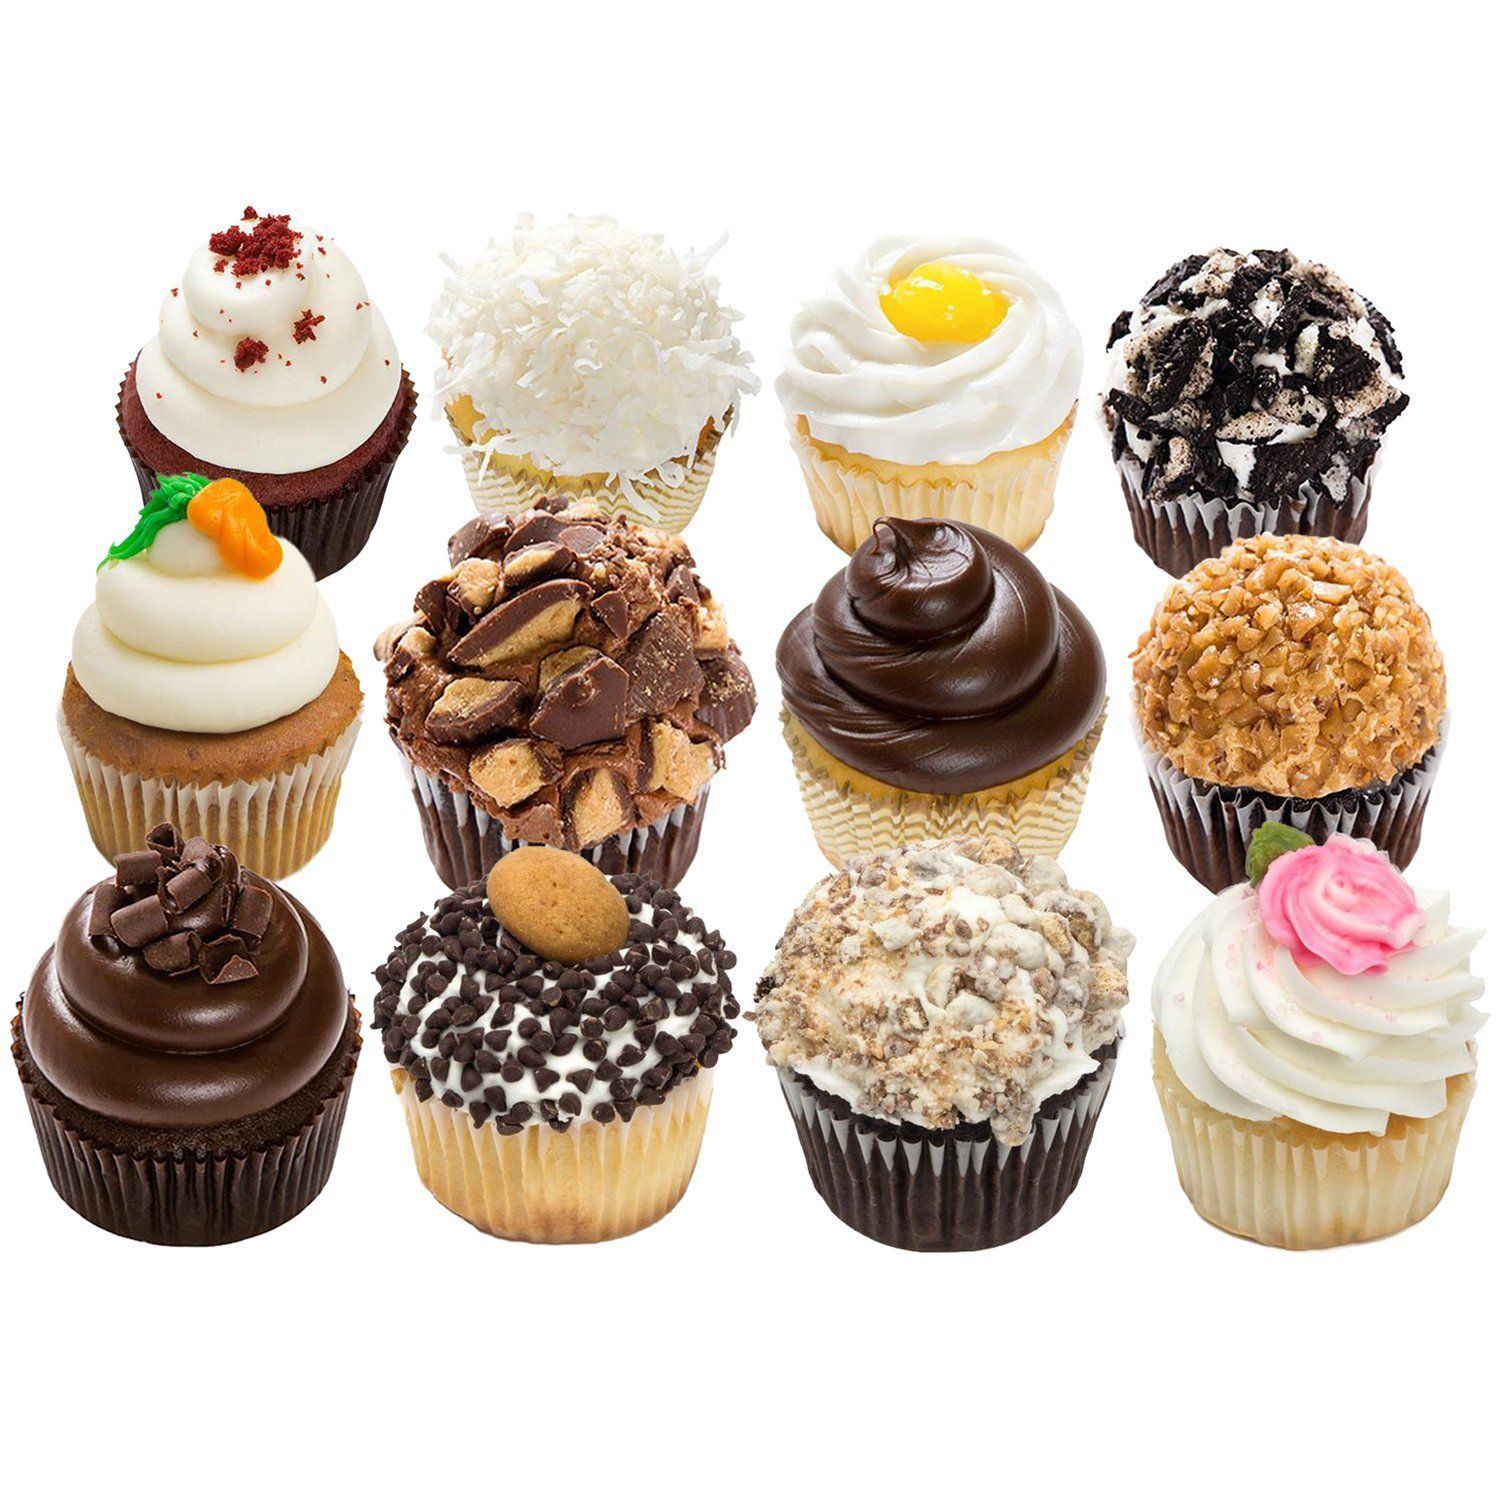 Gourmet Cupcakes Delivered
 12 Gourmet Cupcakes delivered straight to your door